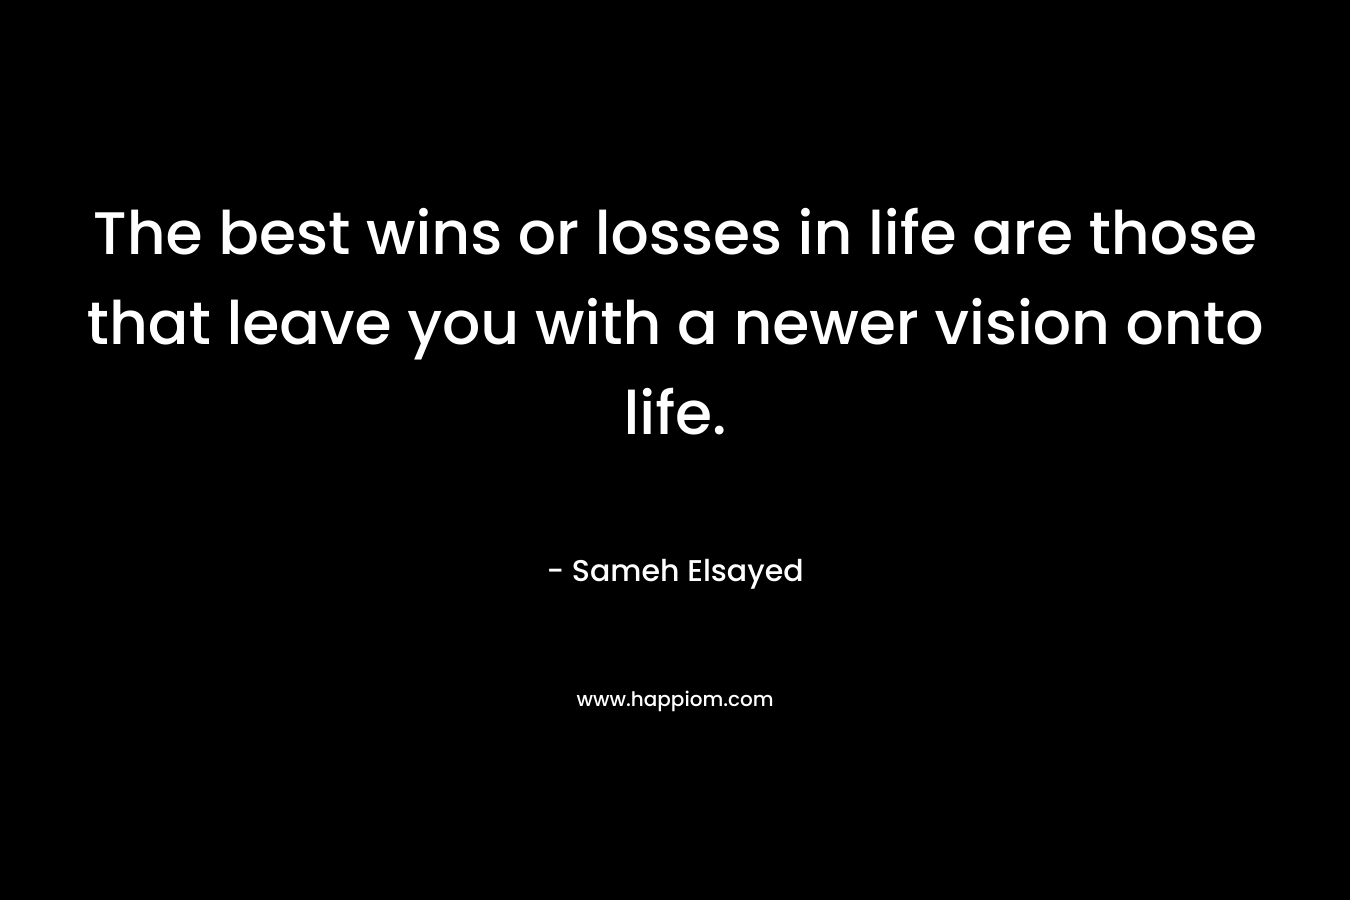 The best wins or losses in life are those that leave you with a newer vision onto life. – Sameh Elsayed